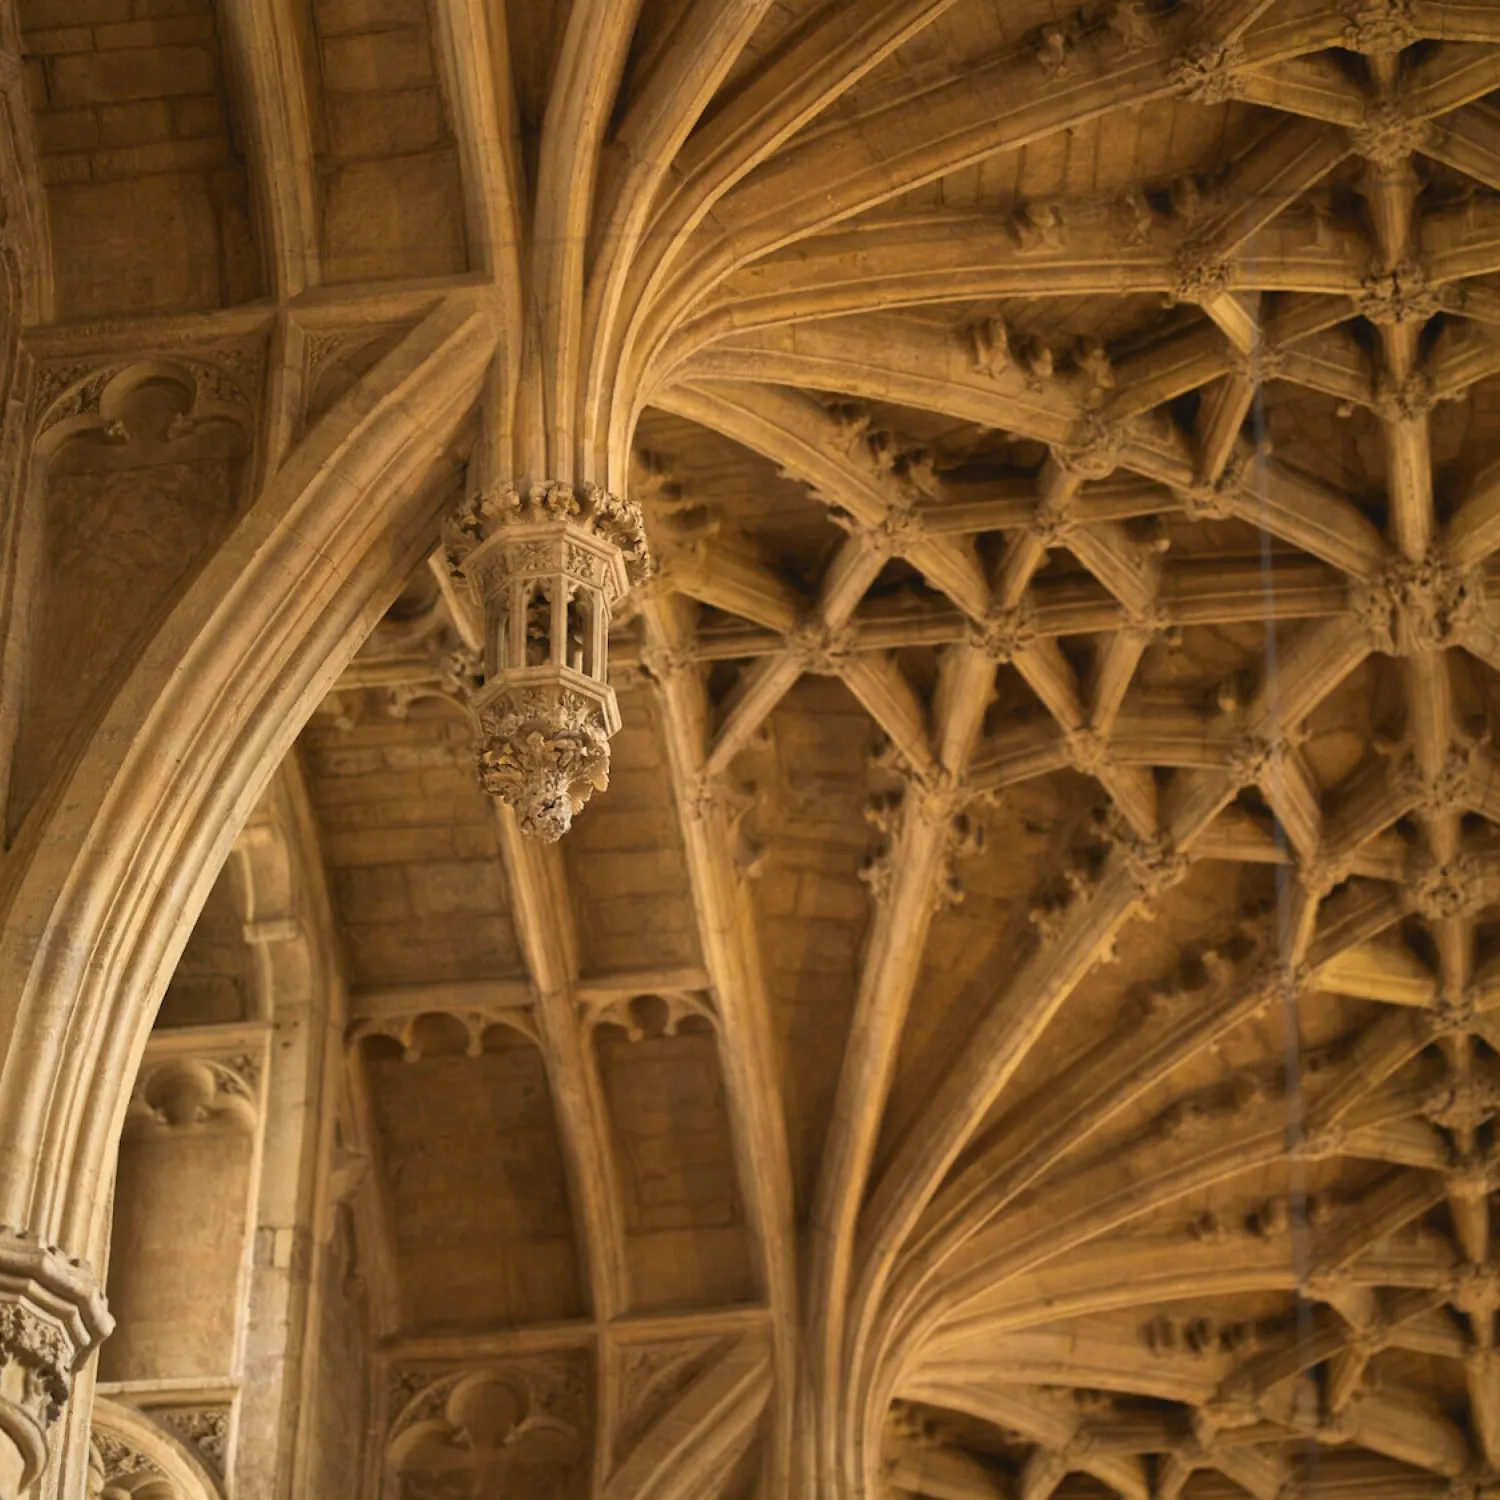 Cathedral vaulting